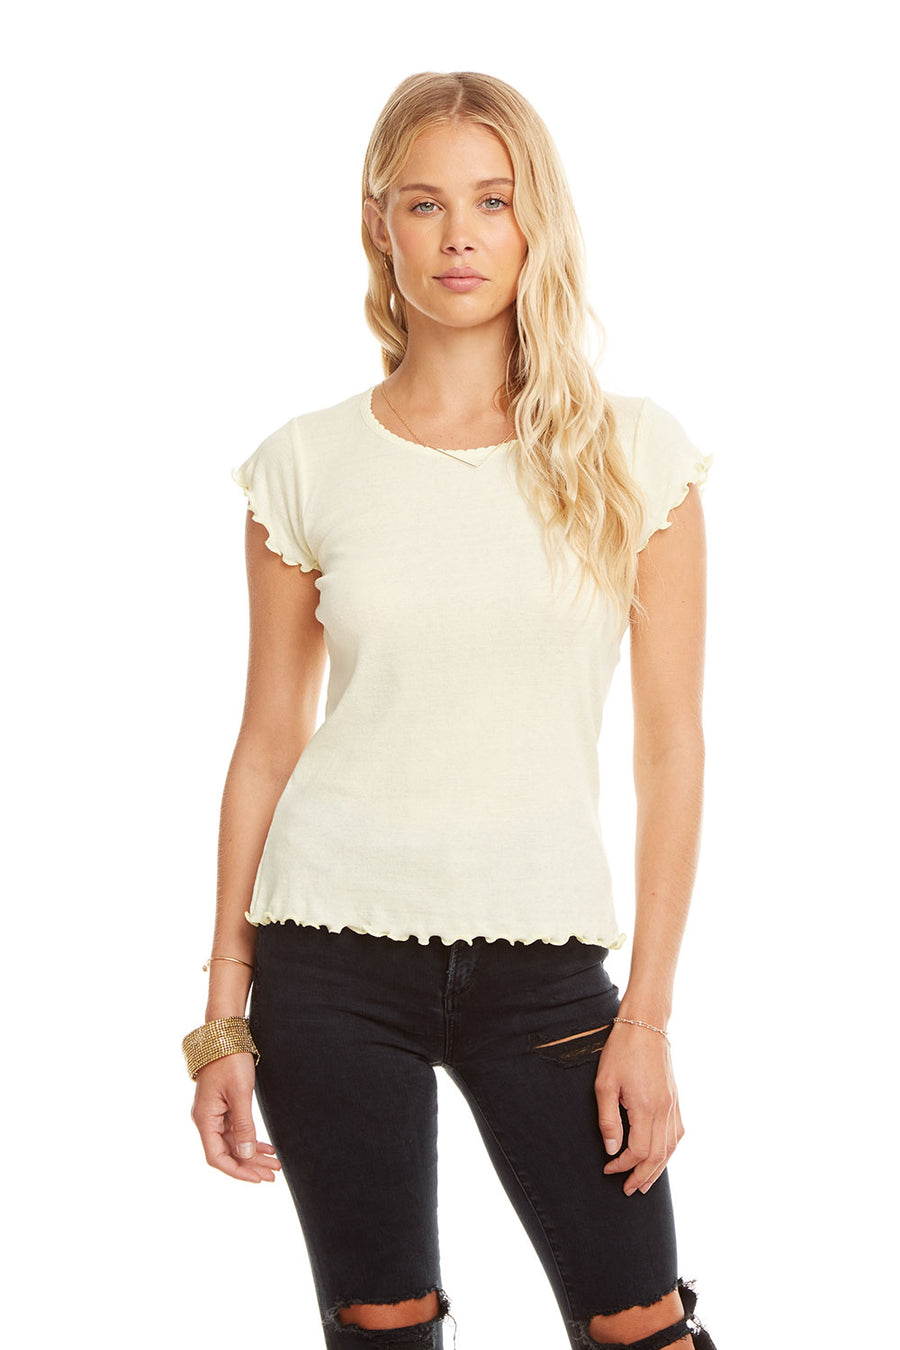 Baby Rib S/S Flouncy Crew Neck Tee WOMENS - chaserbrand